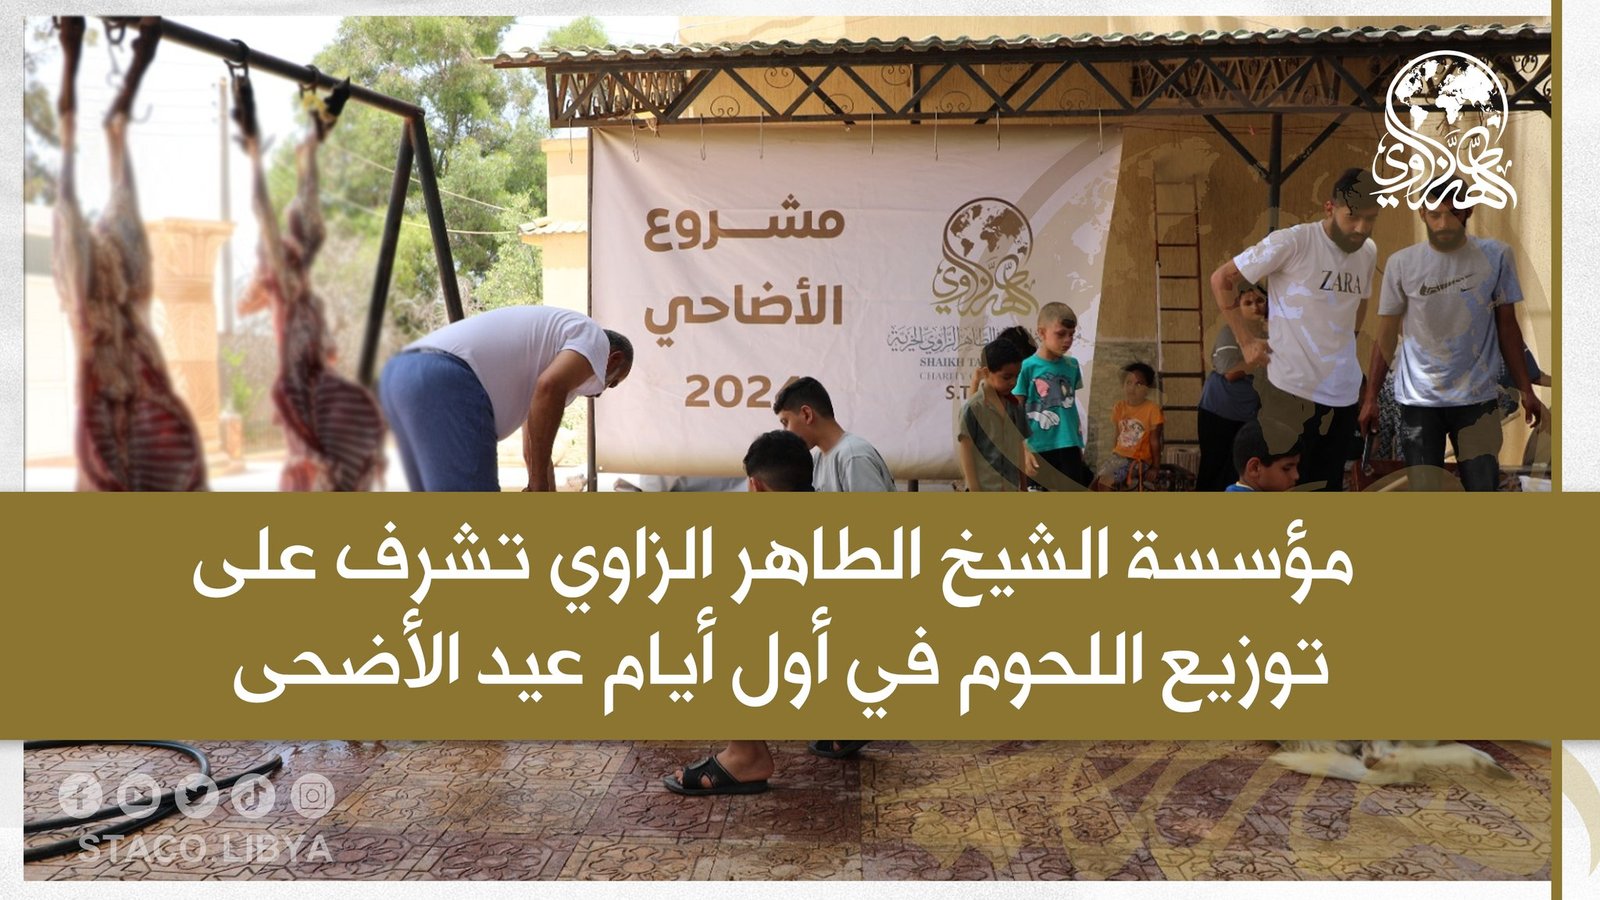 Sheikh Tahir Al-Zzawi organization supervises the distribution of meat on the first day of Eid Al-Adha